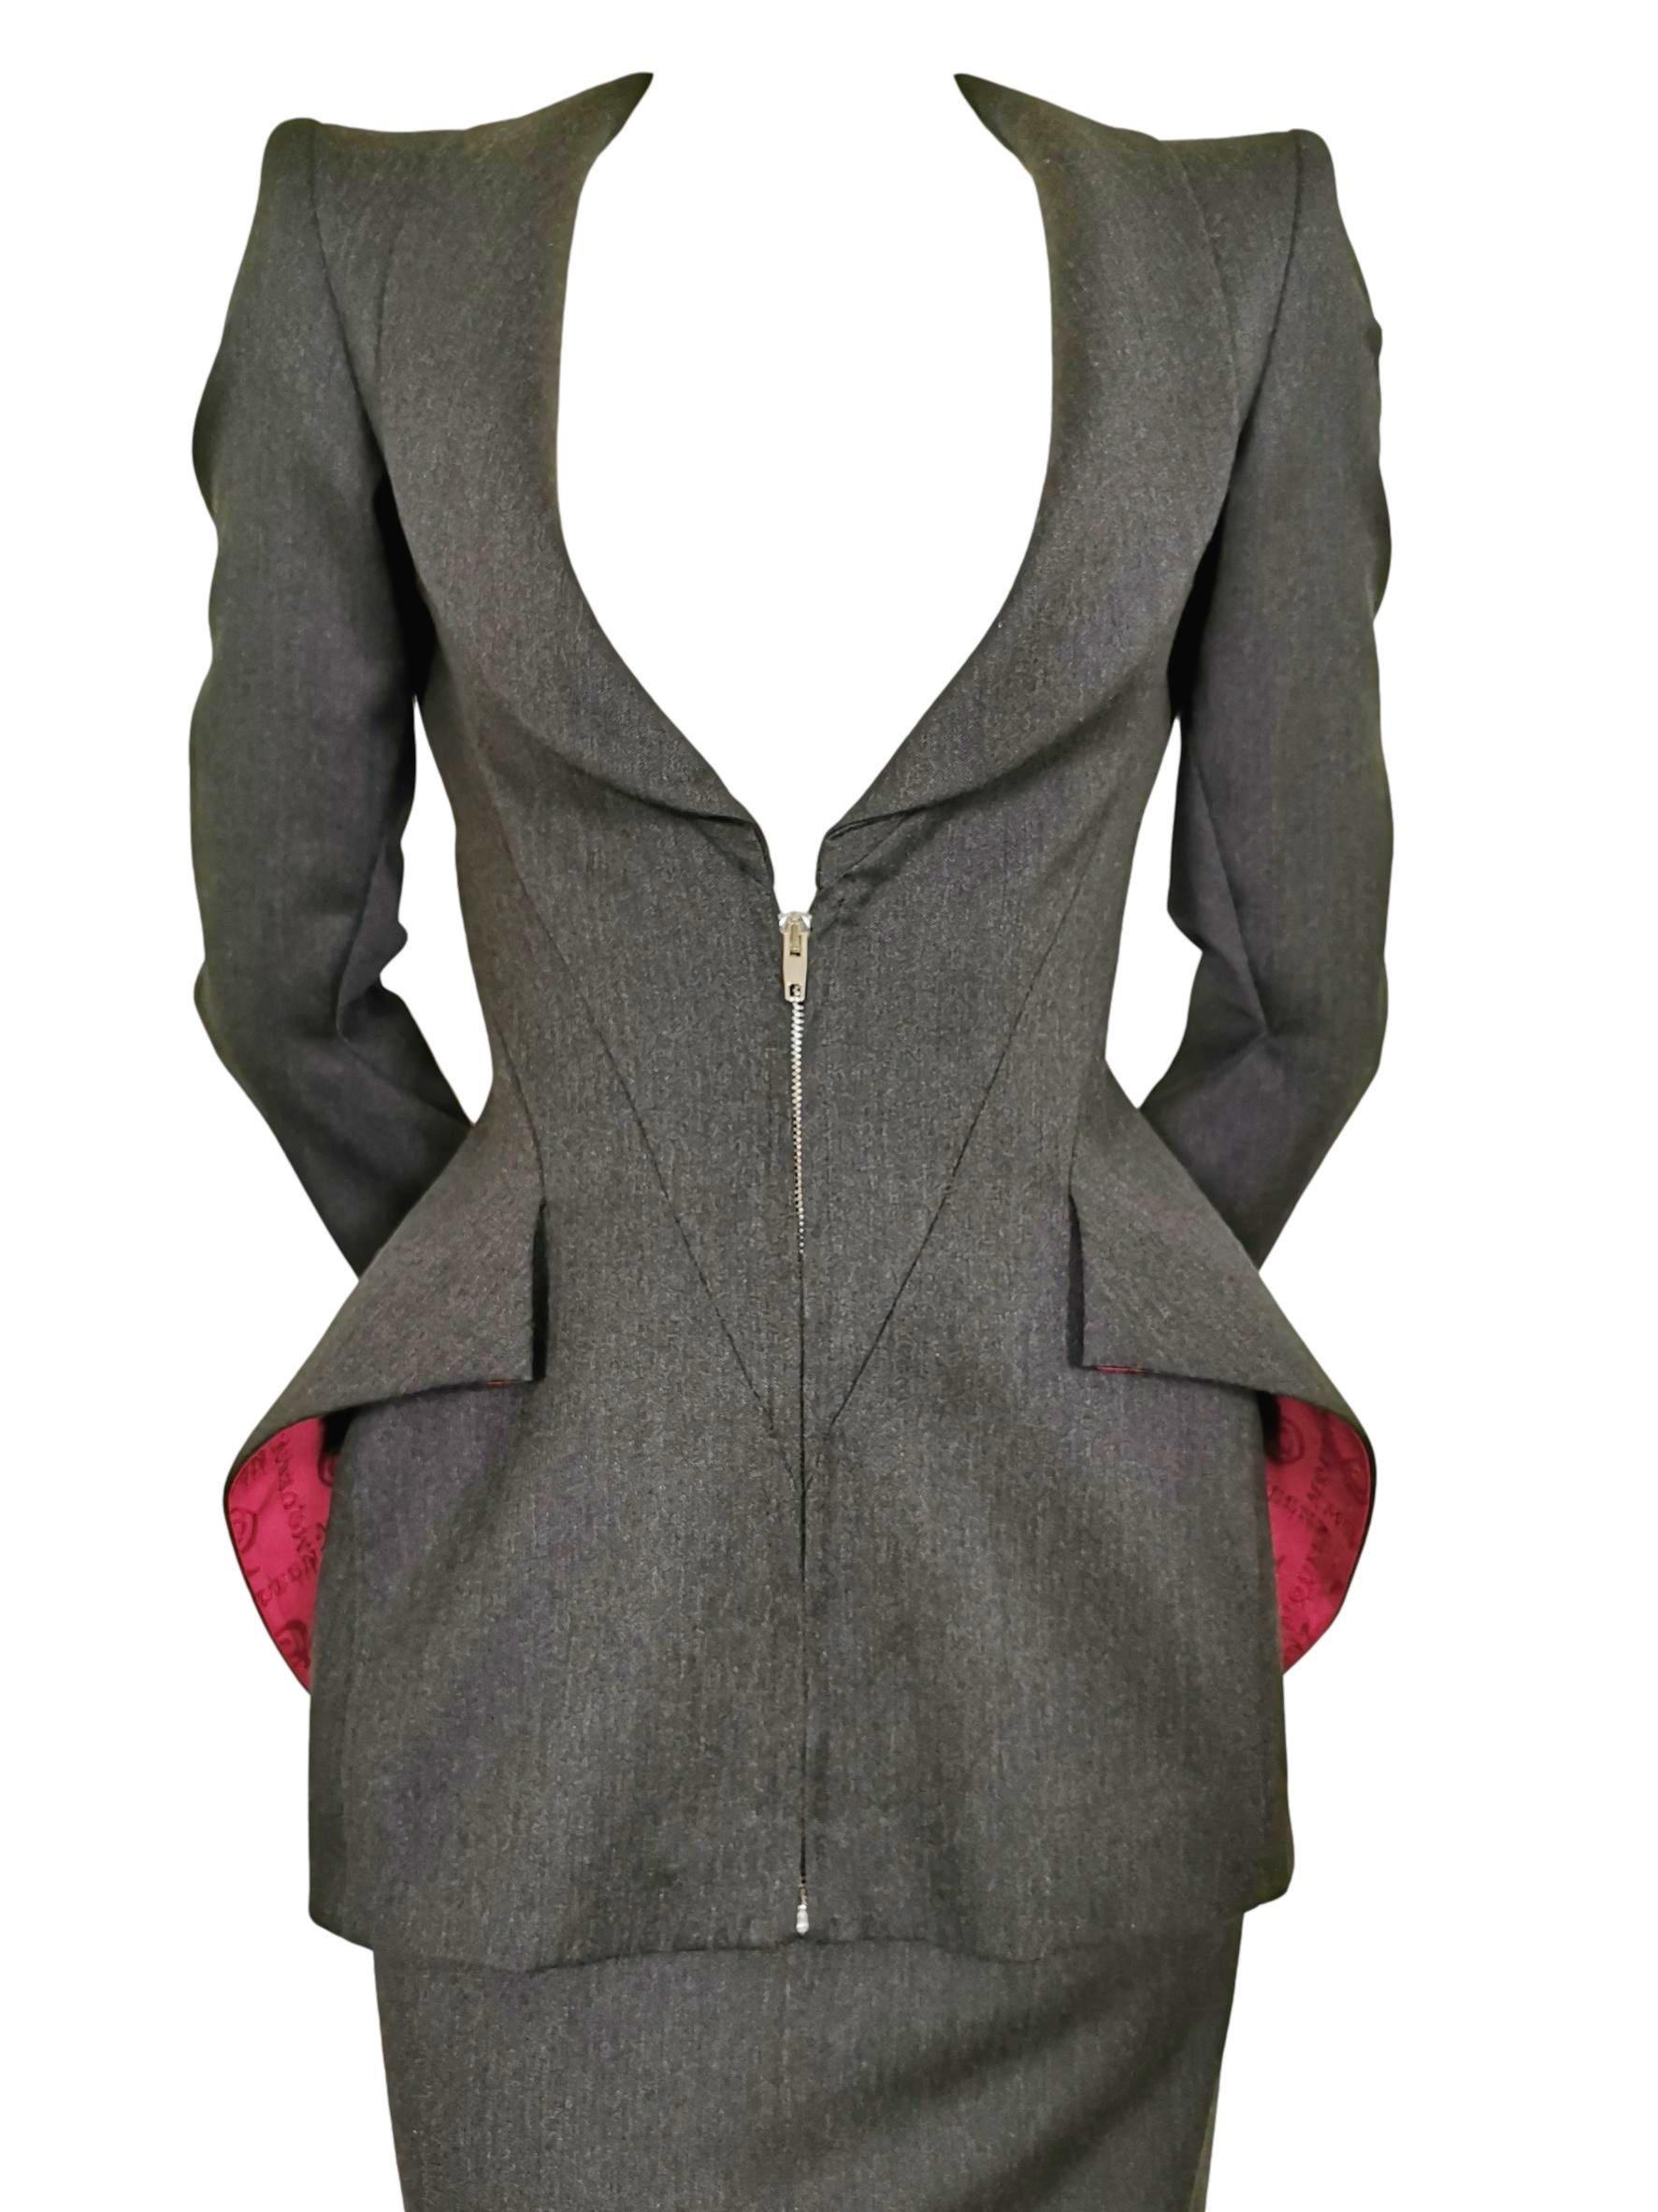 Alexander McQueen 1998 Joan Collection Fitted Skirt Suit 5